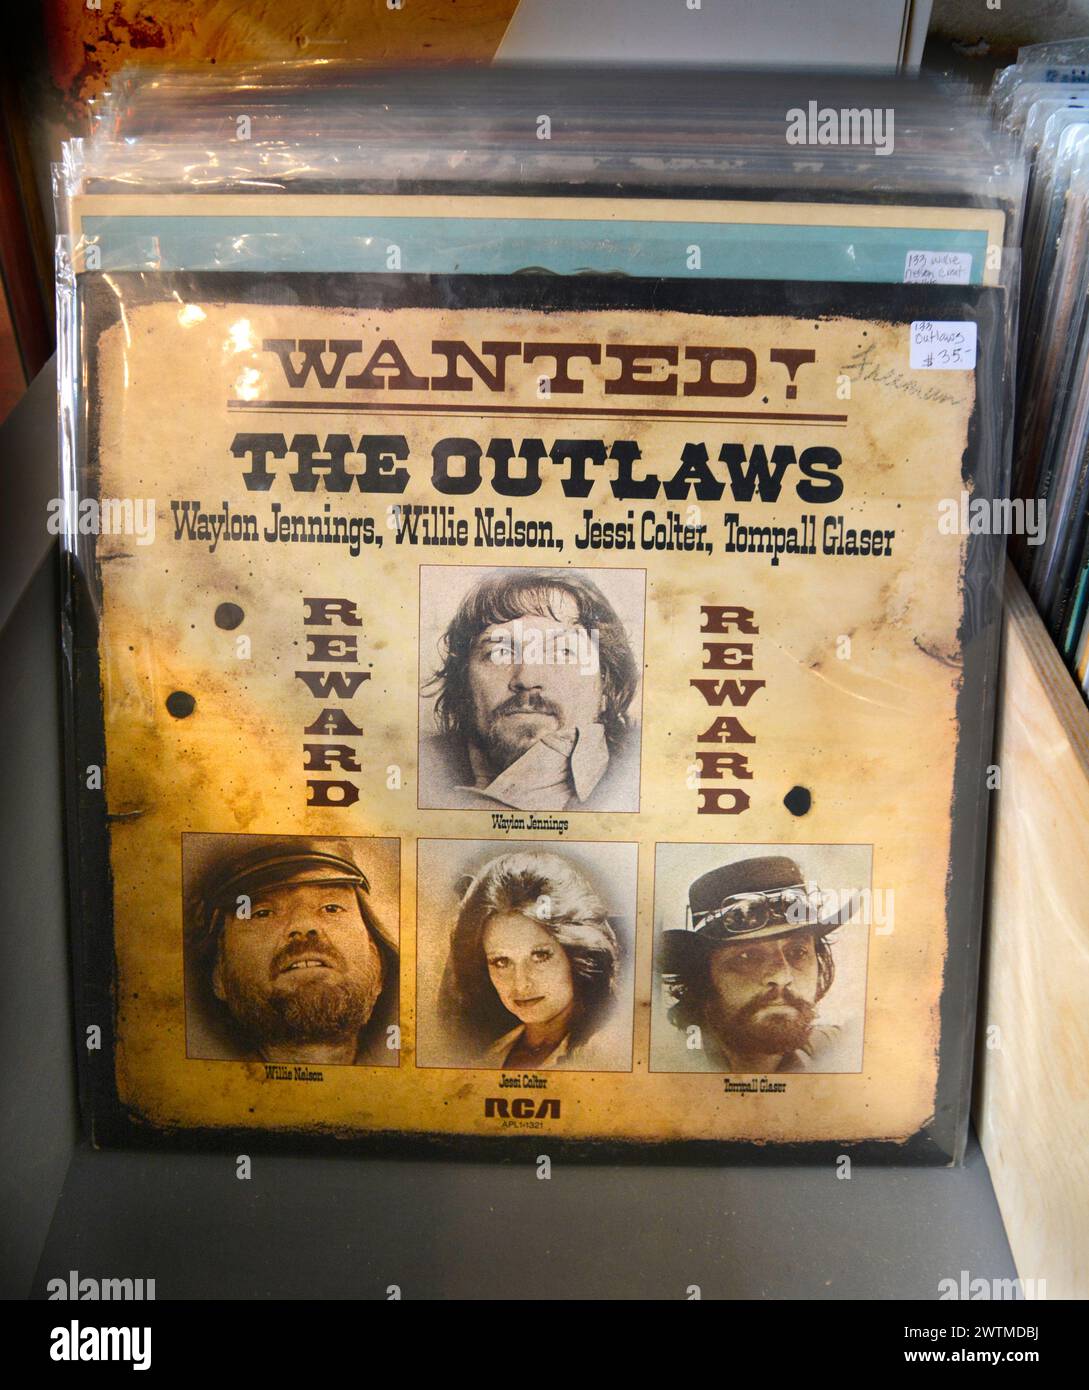 A copy of the 1976 album 'Wanted The Outlaws' featuring Willie Nelson, Waylon Jennings, Jessi Colter and Tompall Glaser for sale in an antique shop. Stock Photo